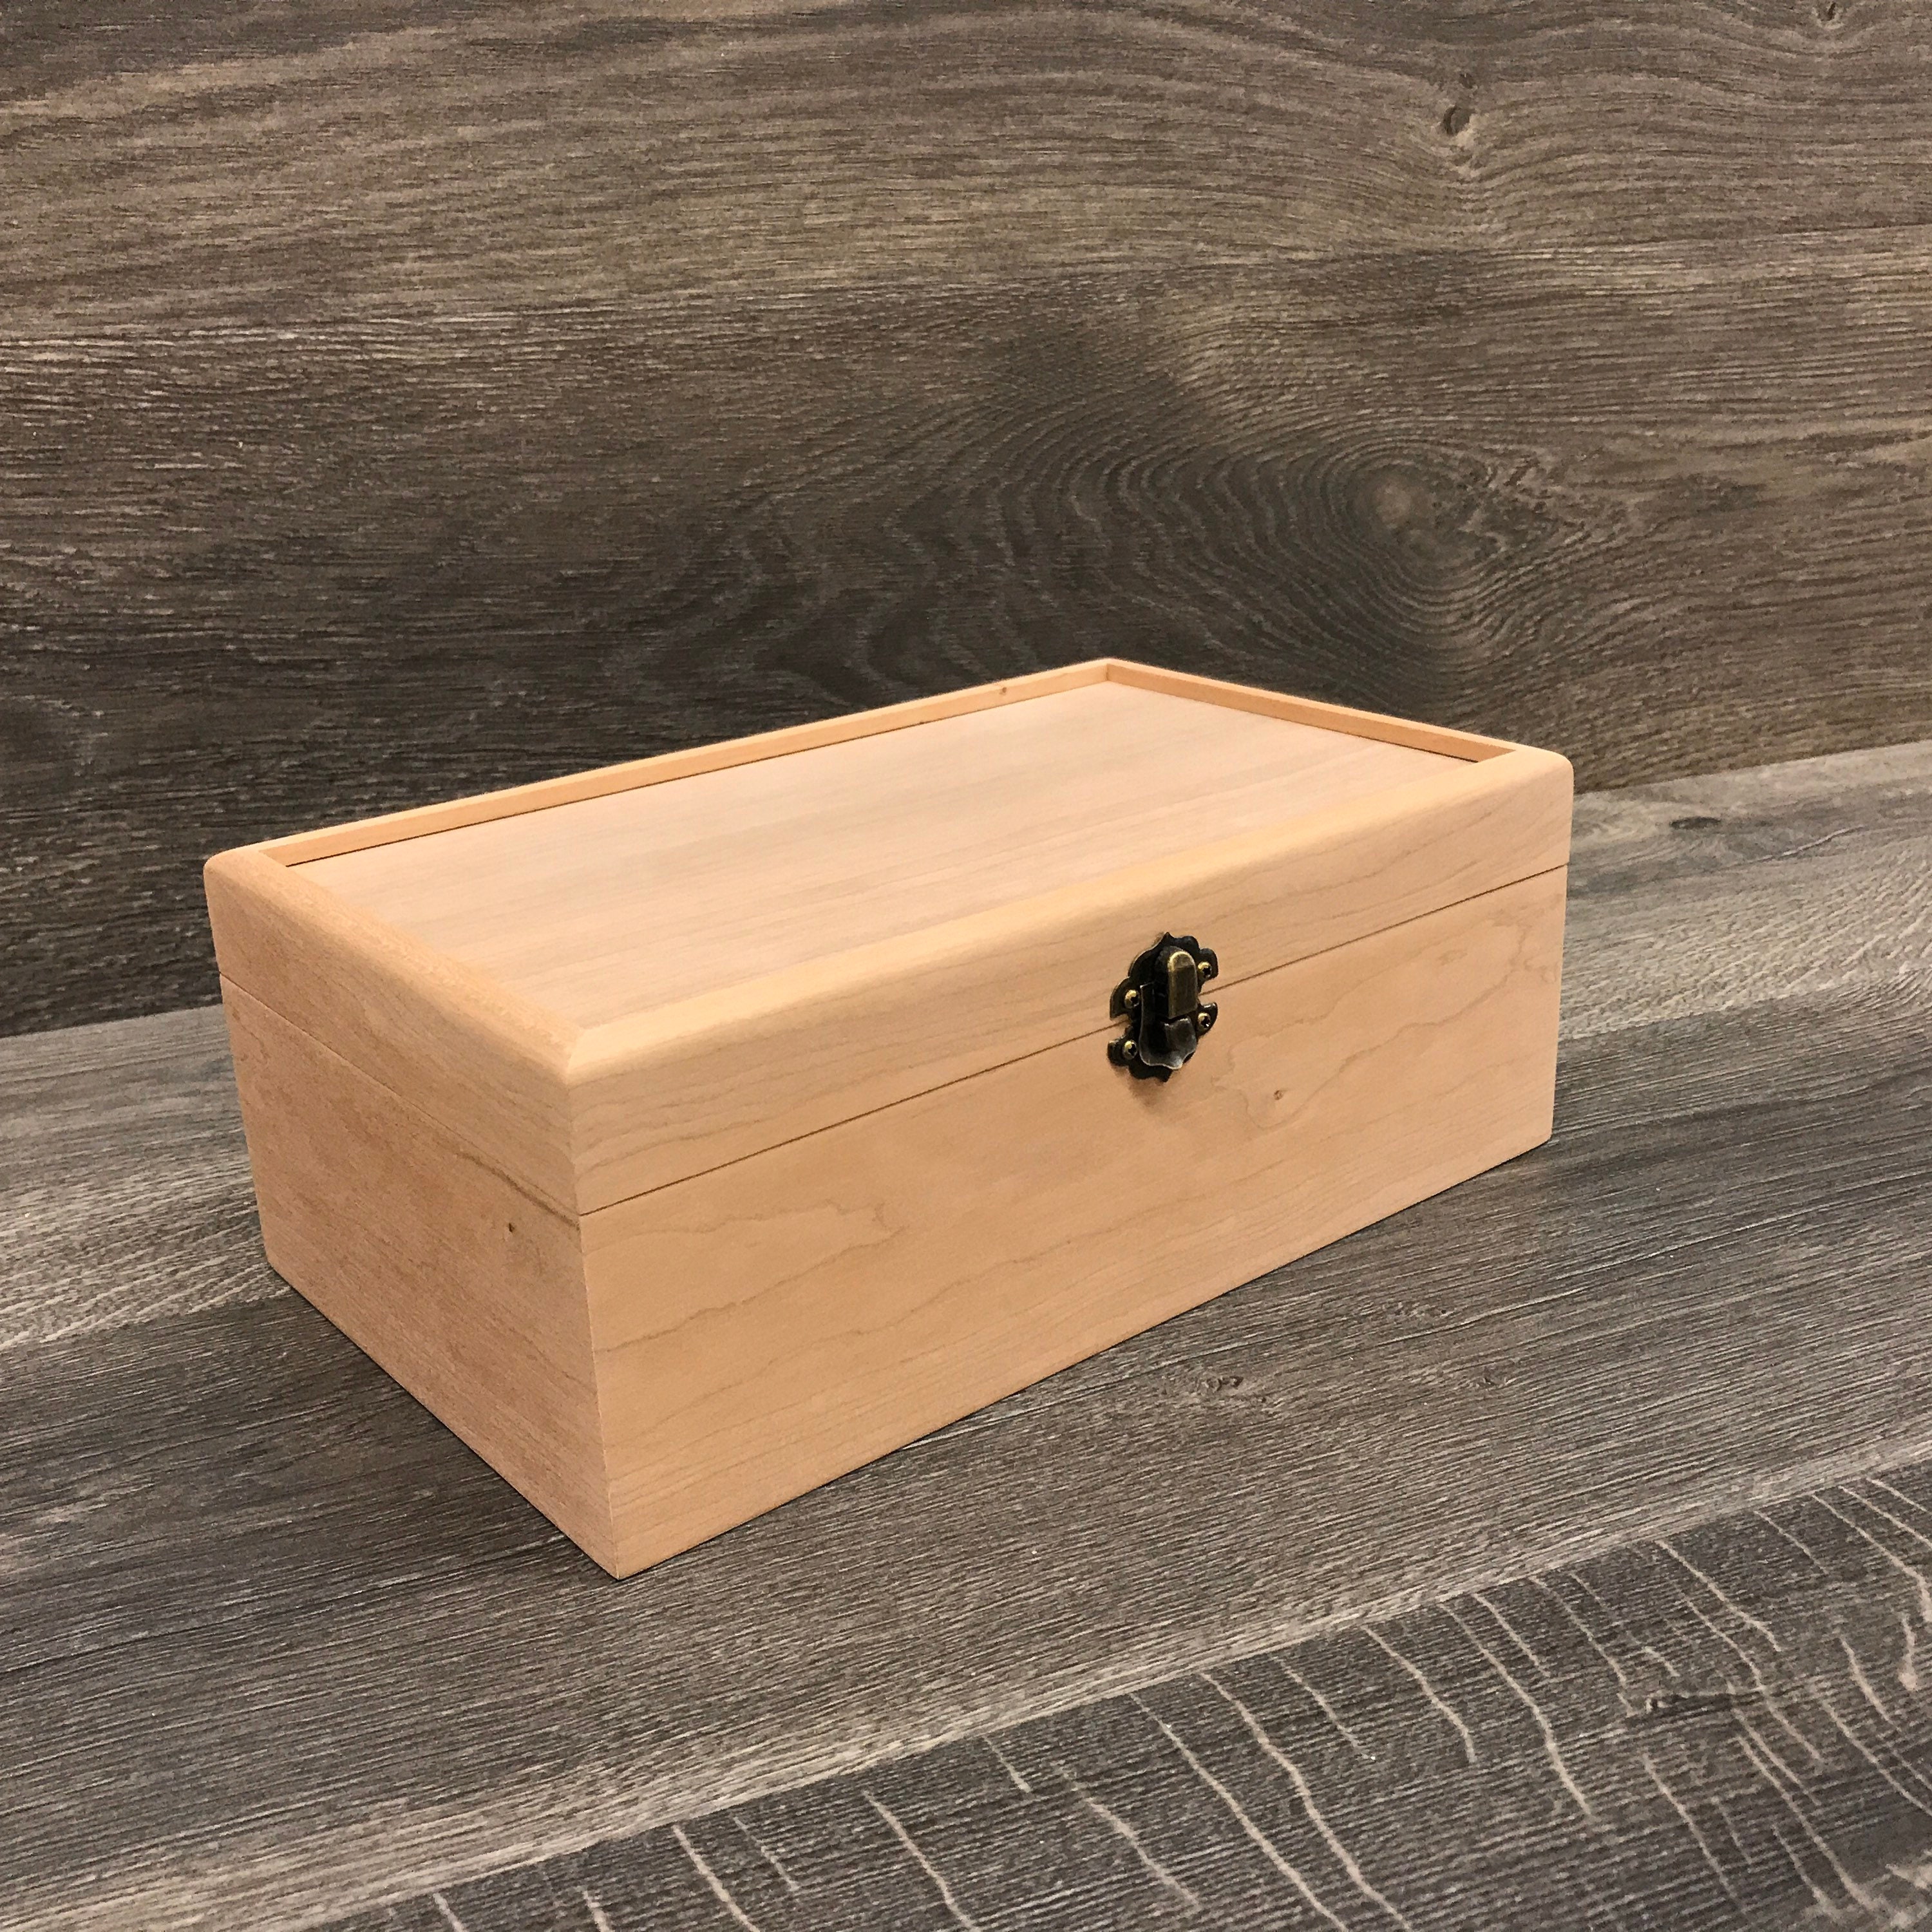 Extra Large Unfinished Wood Box With Lid gifts-memory Box-engravable Wood  Box-personalized-wood Storage Box-handmade Box Shown in Oak 